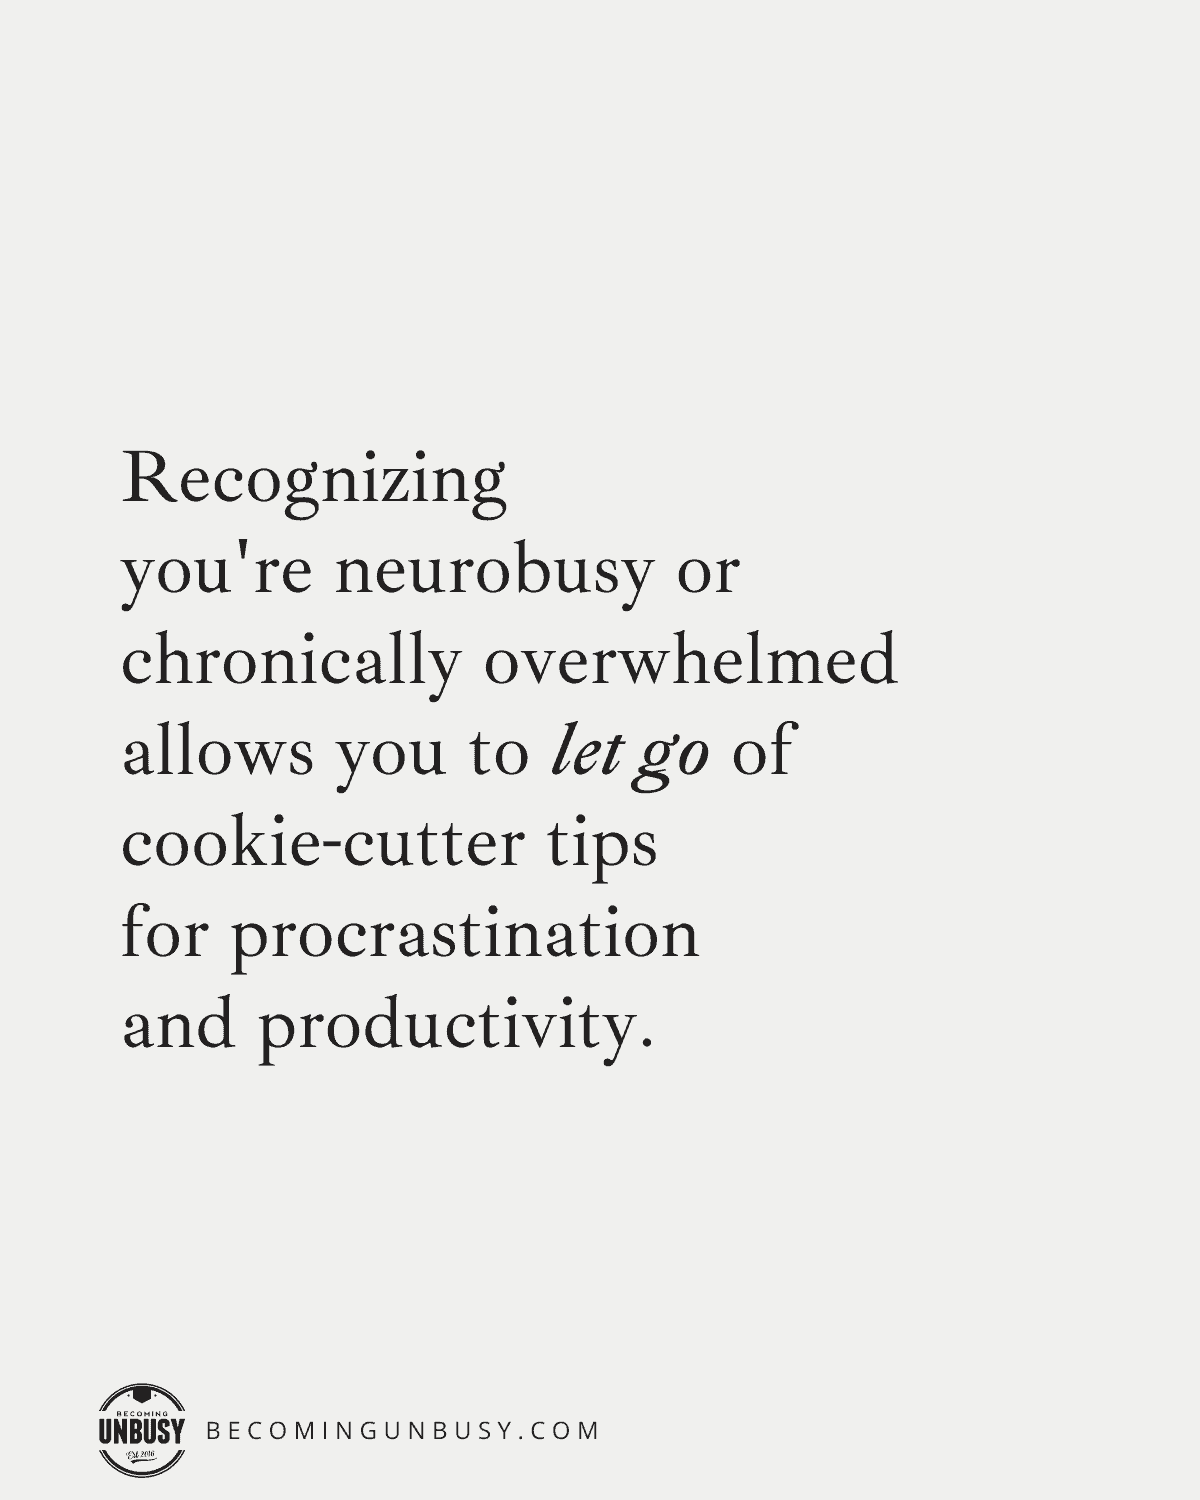 Recognizing you're neurobusy or chronically overwhelmed allows you to let go of cookie-cutter tips for procrastination and productivity.